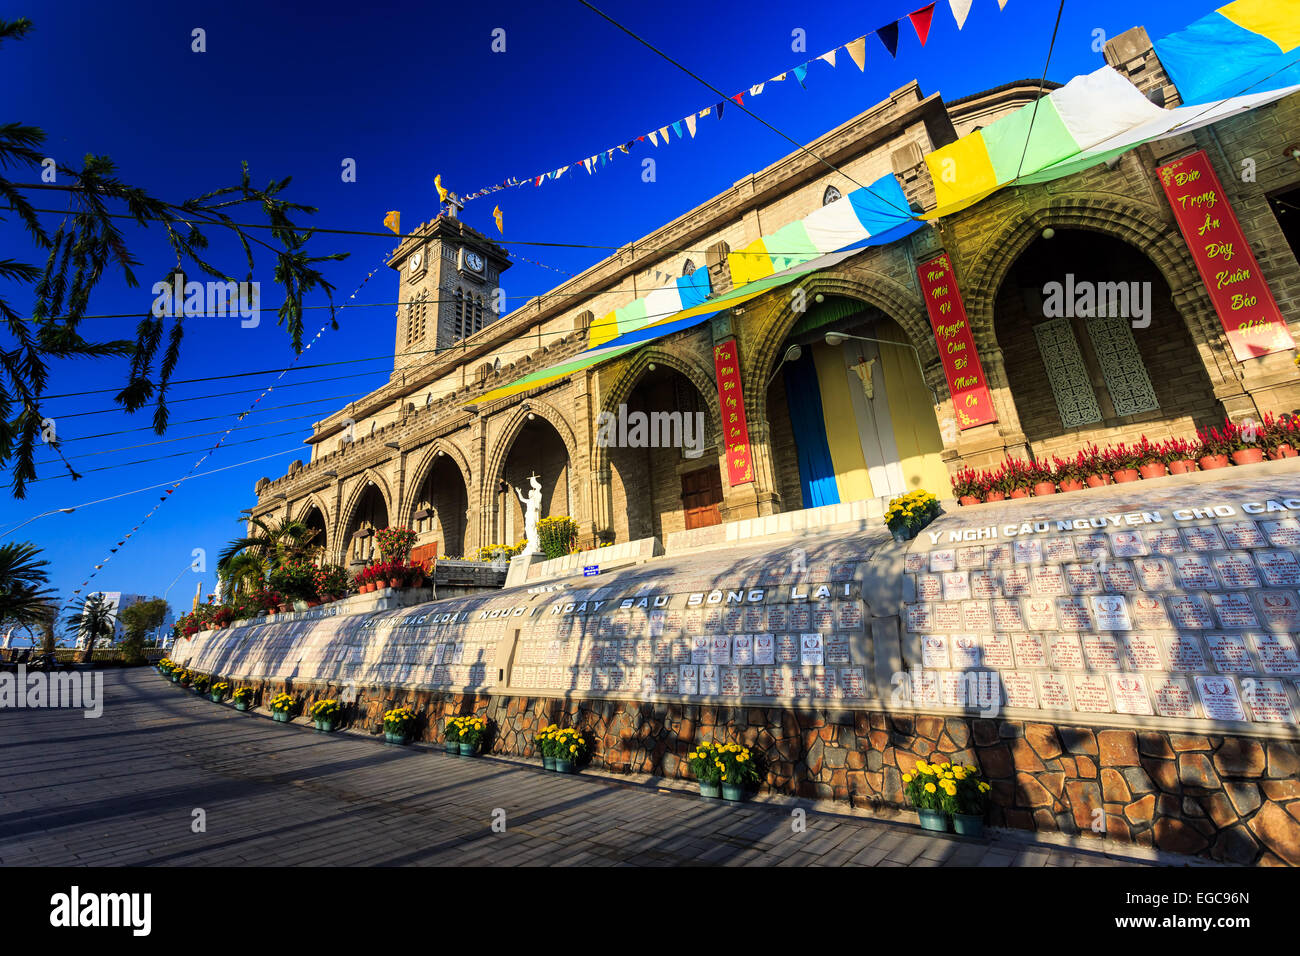 King Cathedral (Stone Church) in the evening. Nha Trang, Vietnam Stock Photo